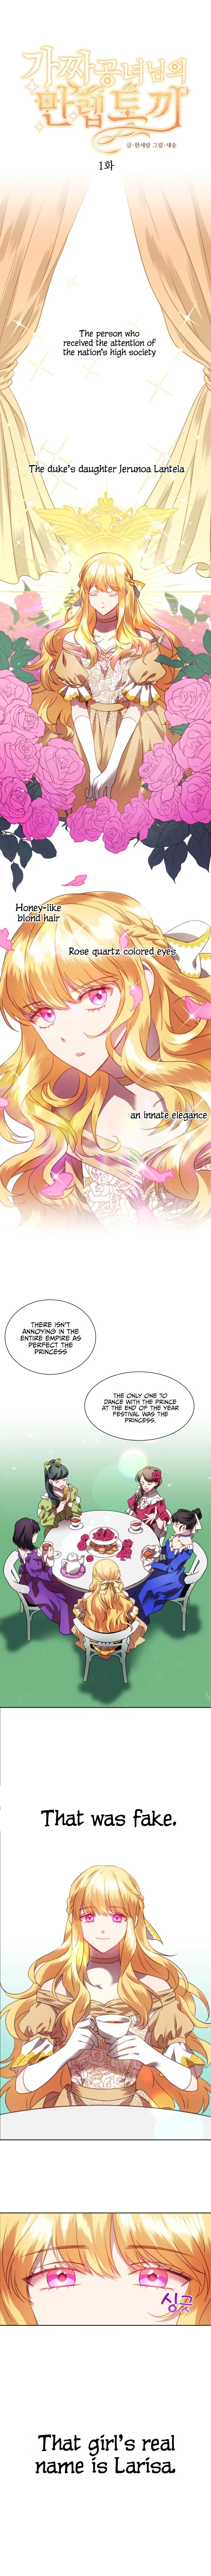 The Fake Princess' OP Bunny Chapter 1 page 1